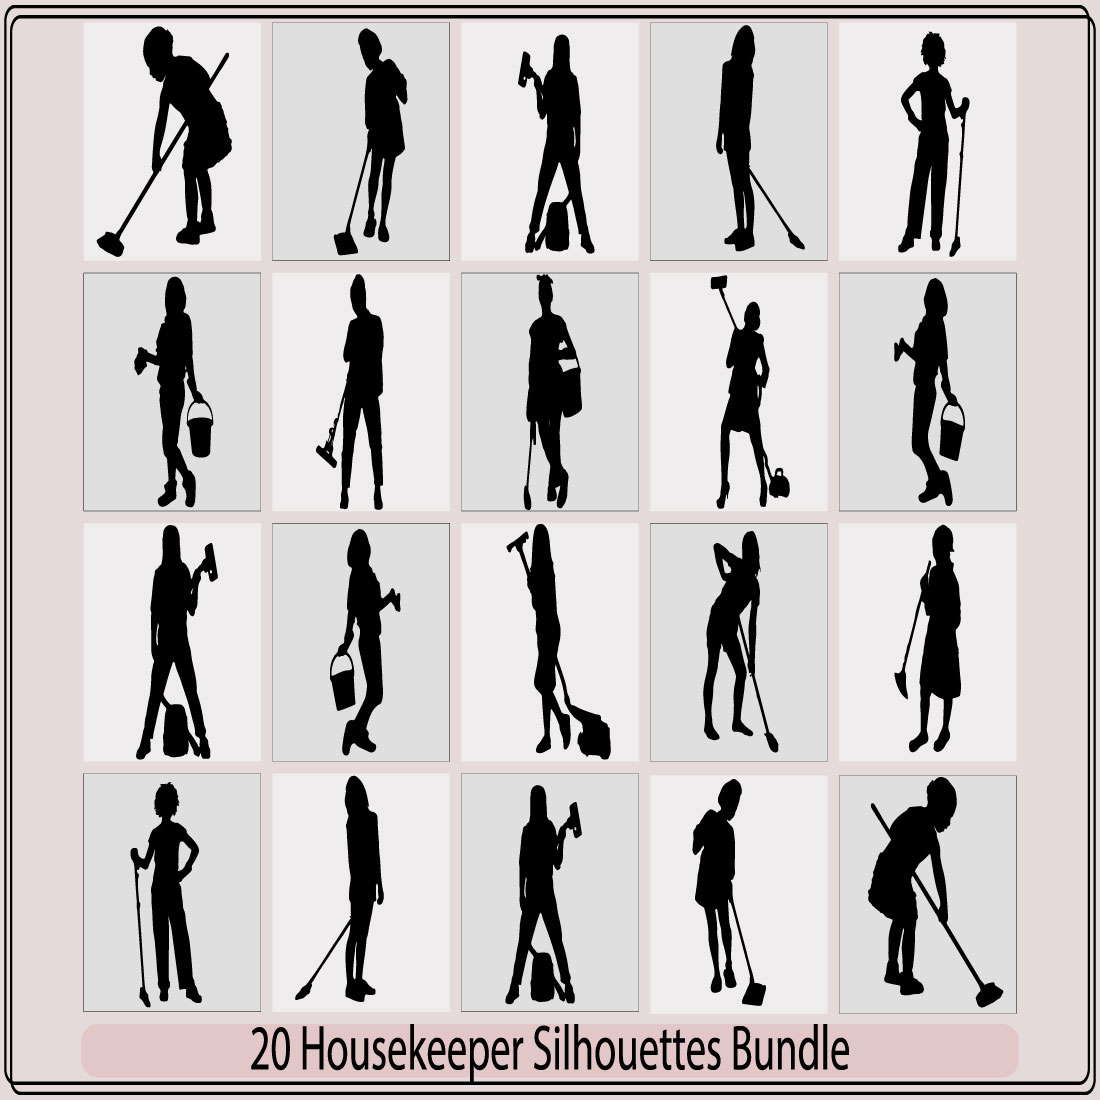 Silhouette of female cleaner,cleaning maid silhouette vector illustration Housemaid,Maid Silhouette, Woman Housekeeper, House Cleaning Service illustration Vector preview image.